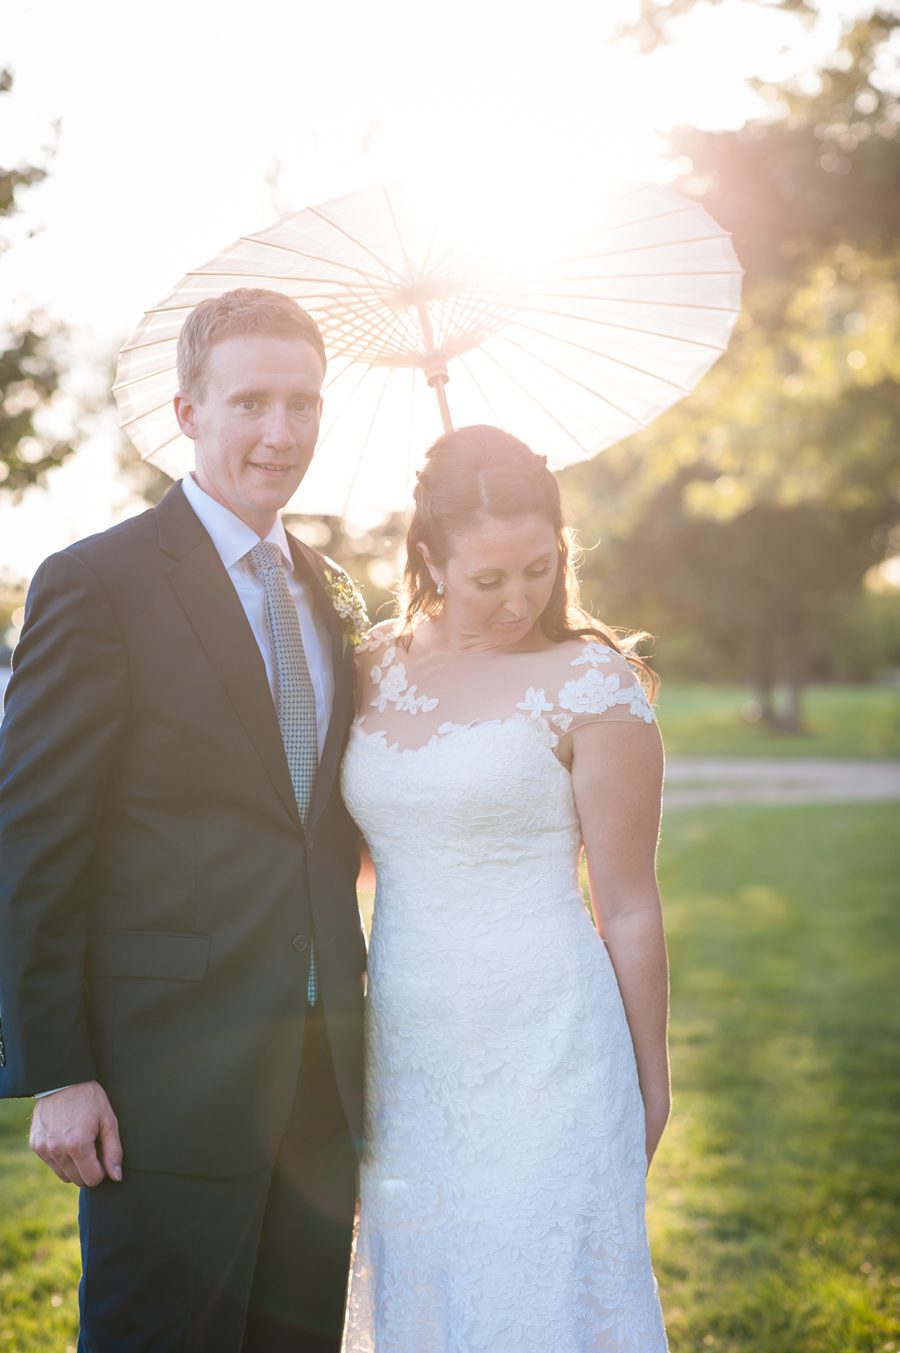 reception at sunset – bride and groom having fun